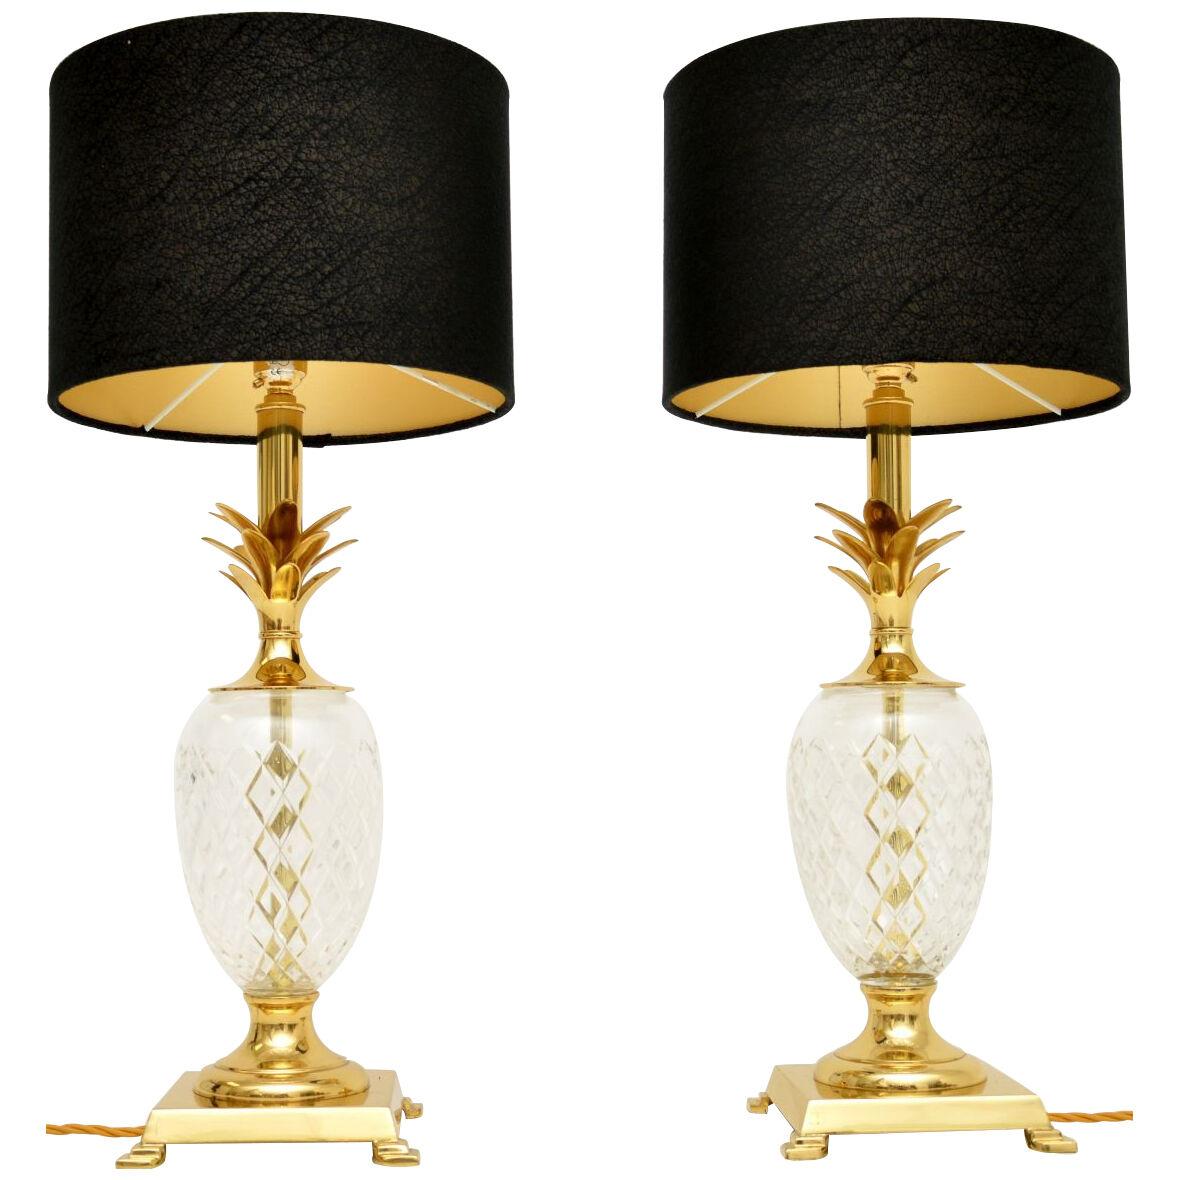 Pair of Vintage Brass & Glass Pineapple Table Lamps